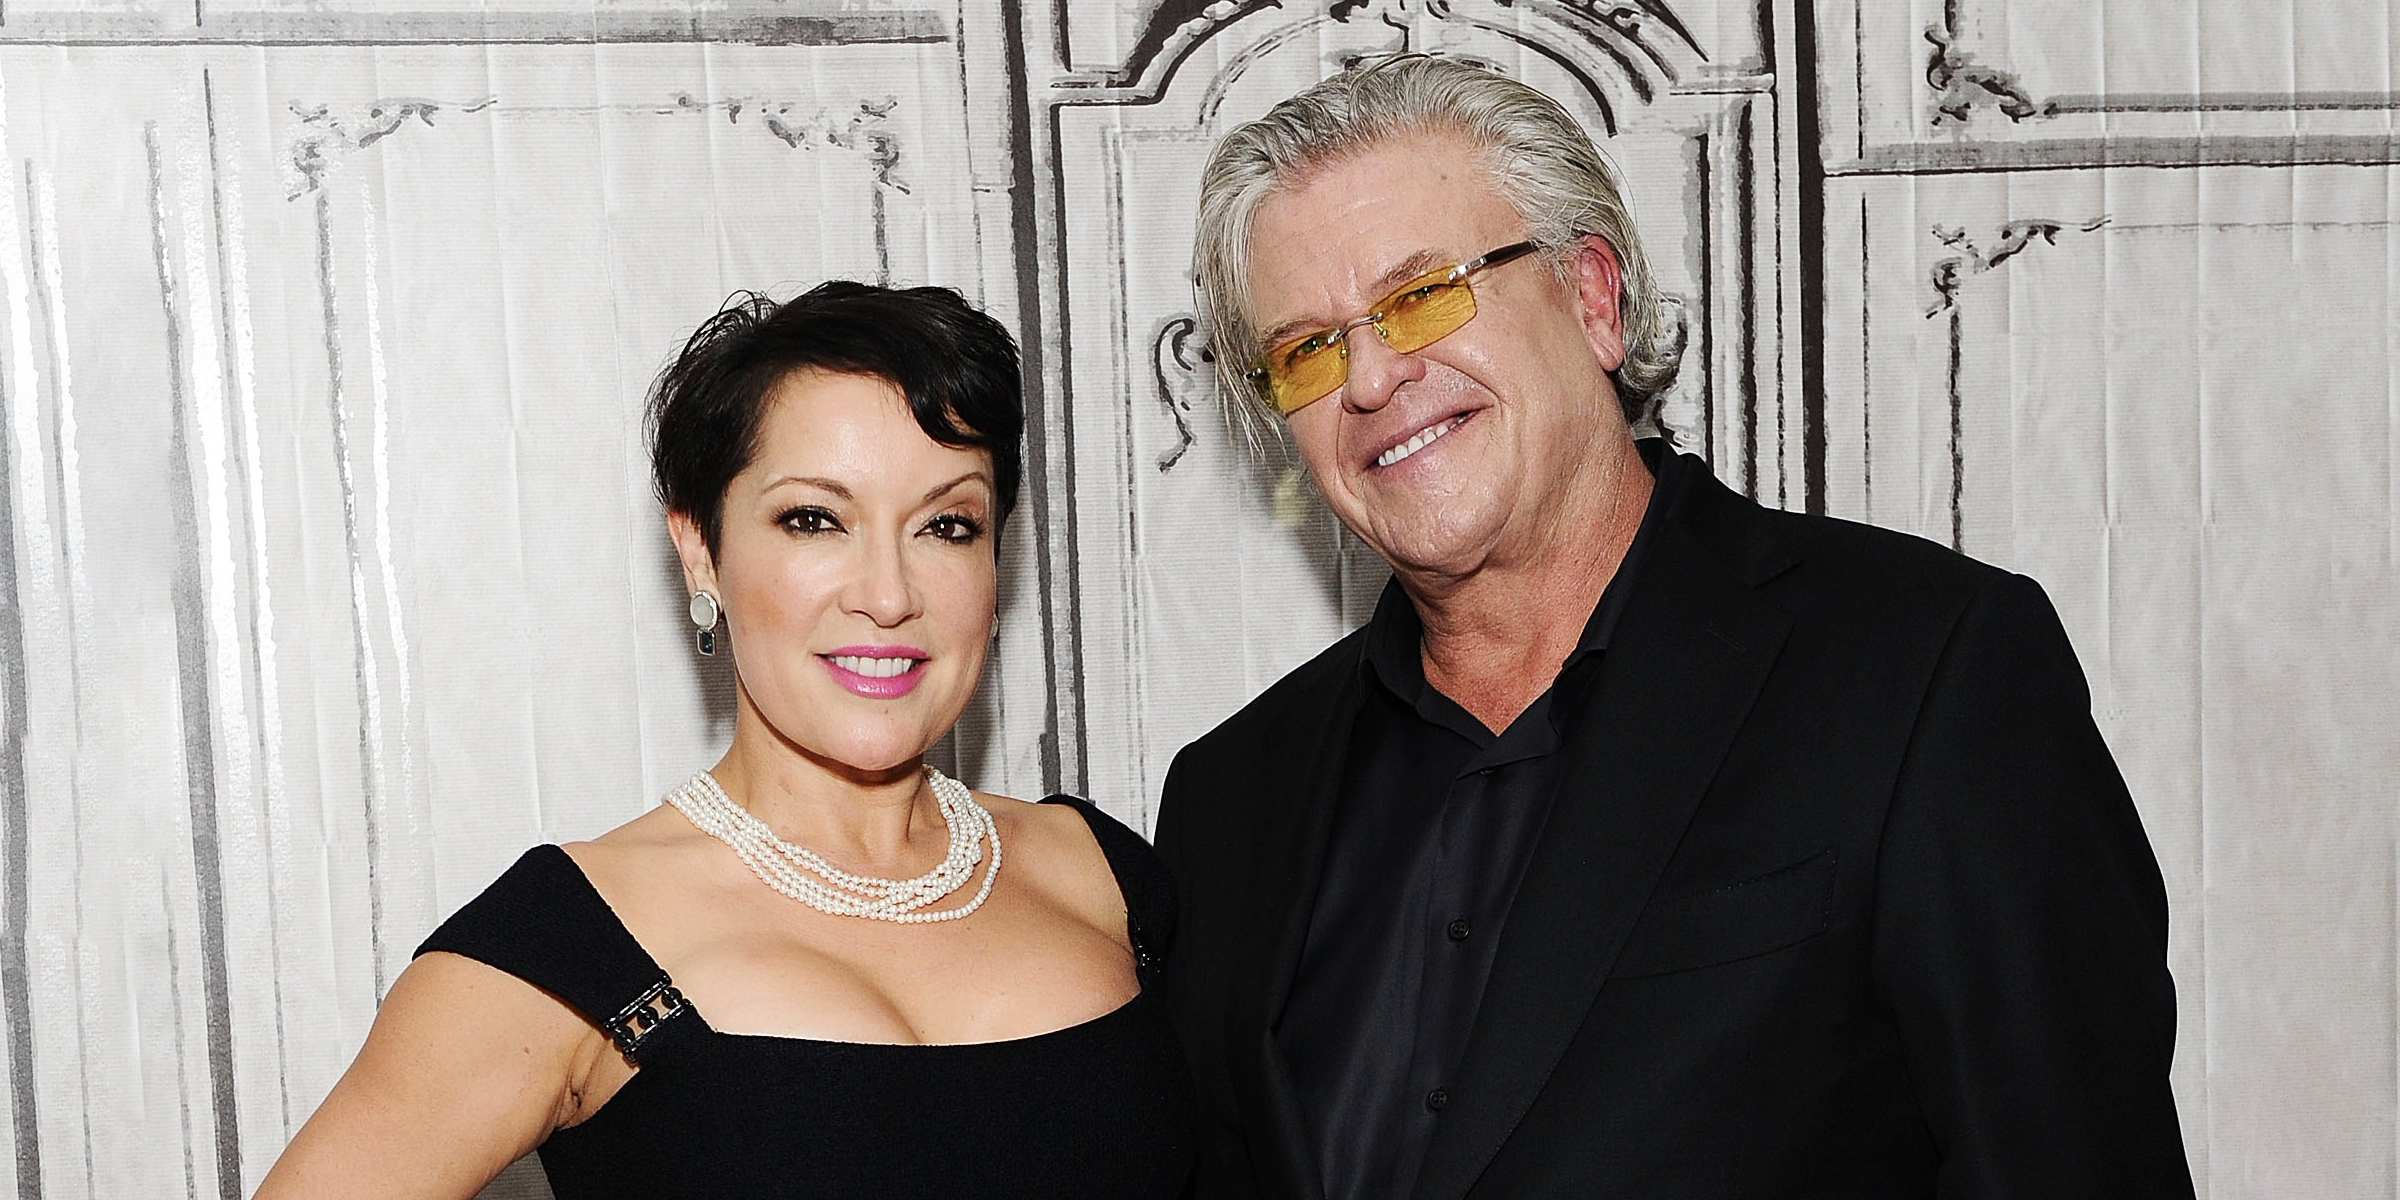 Margo Rey and Ron White | Source: Getty Images